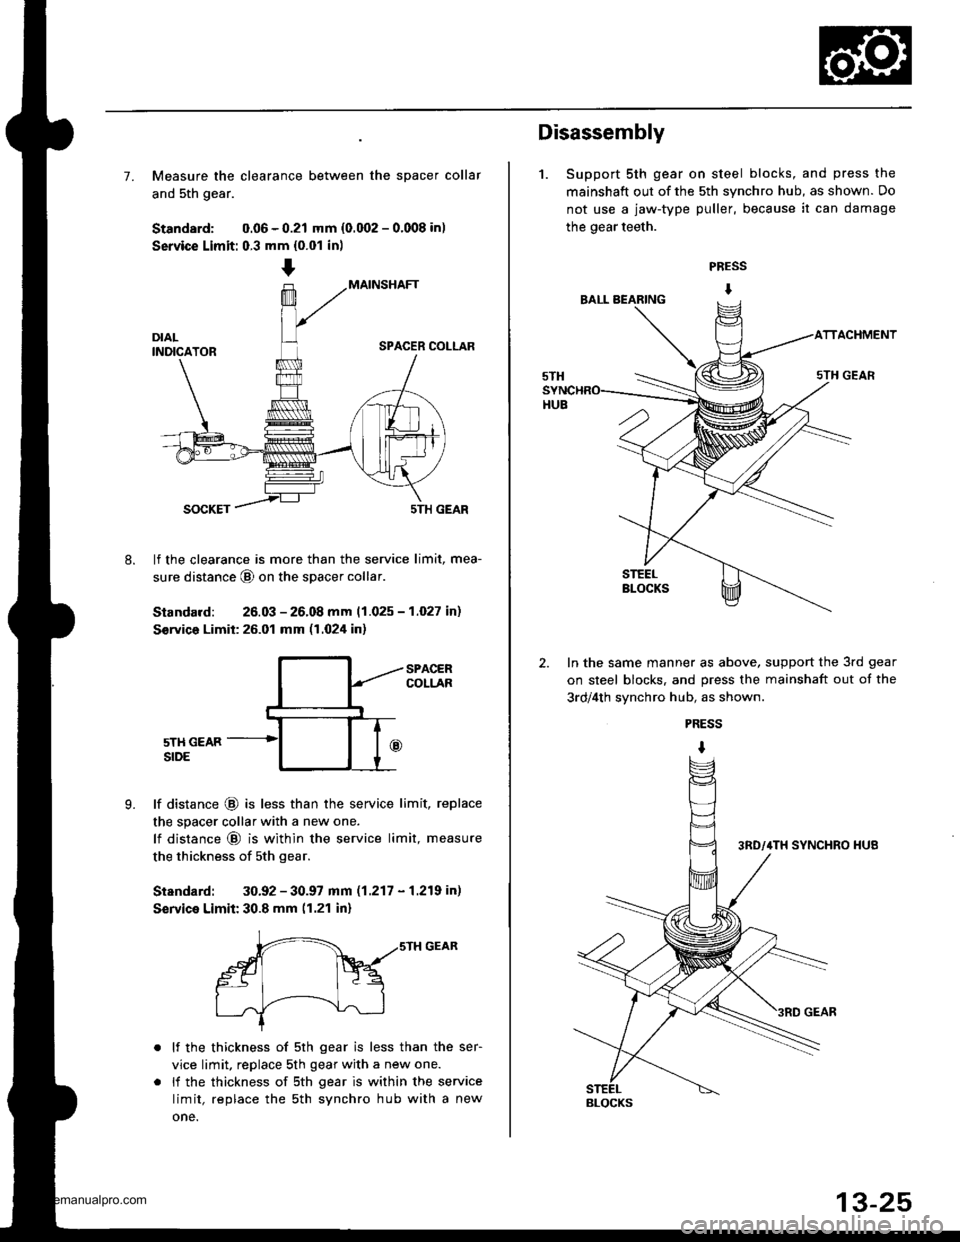 HONDA CR-V 1997 RD1-RD3 / 1.G Workshop Manual 
7. Measure the clearance between the spacer collar
and 5th gear.
Standard: 0.06 - 0.21 mm {0.002 - 0.008 in)
Service Limit: 0.3 mm {0.01 in)
MAINSHAFT
SPACER COLLAR
8.
SOCKET5TH GEAR
lf the clearance